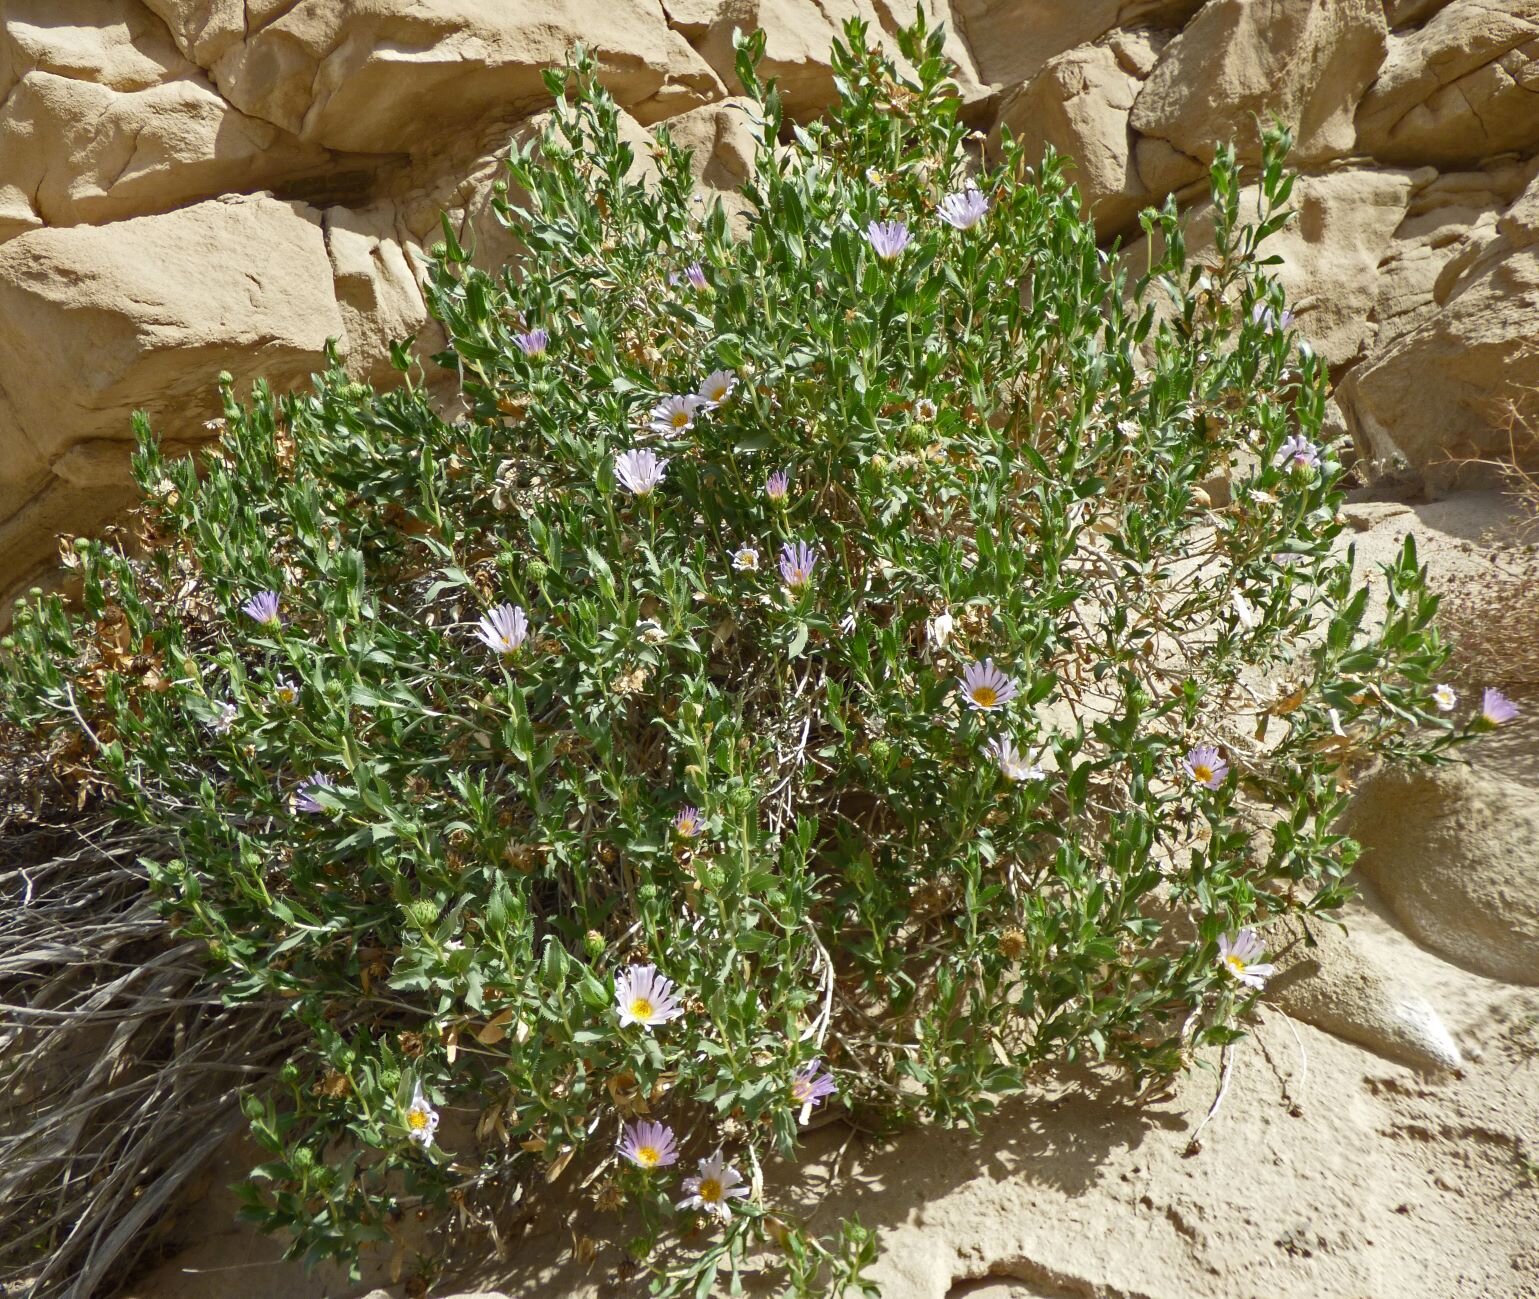 Fish Creek Wash then welcomed us with several Woody Asters